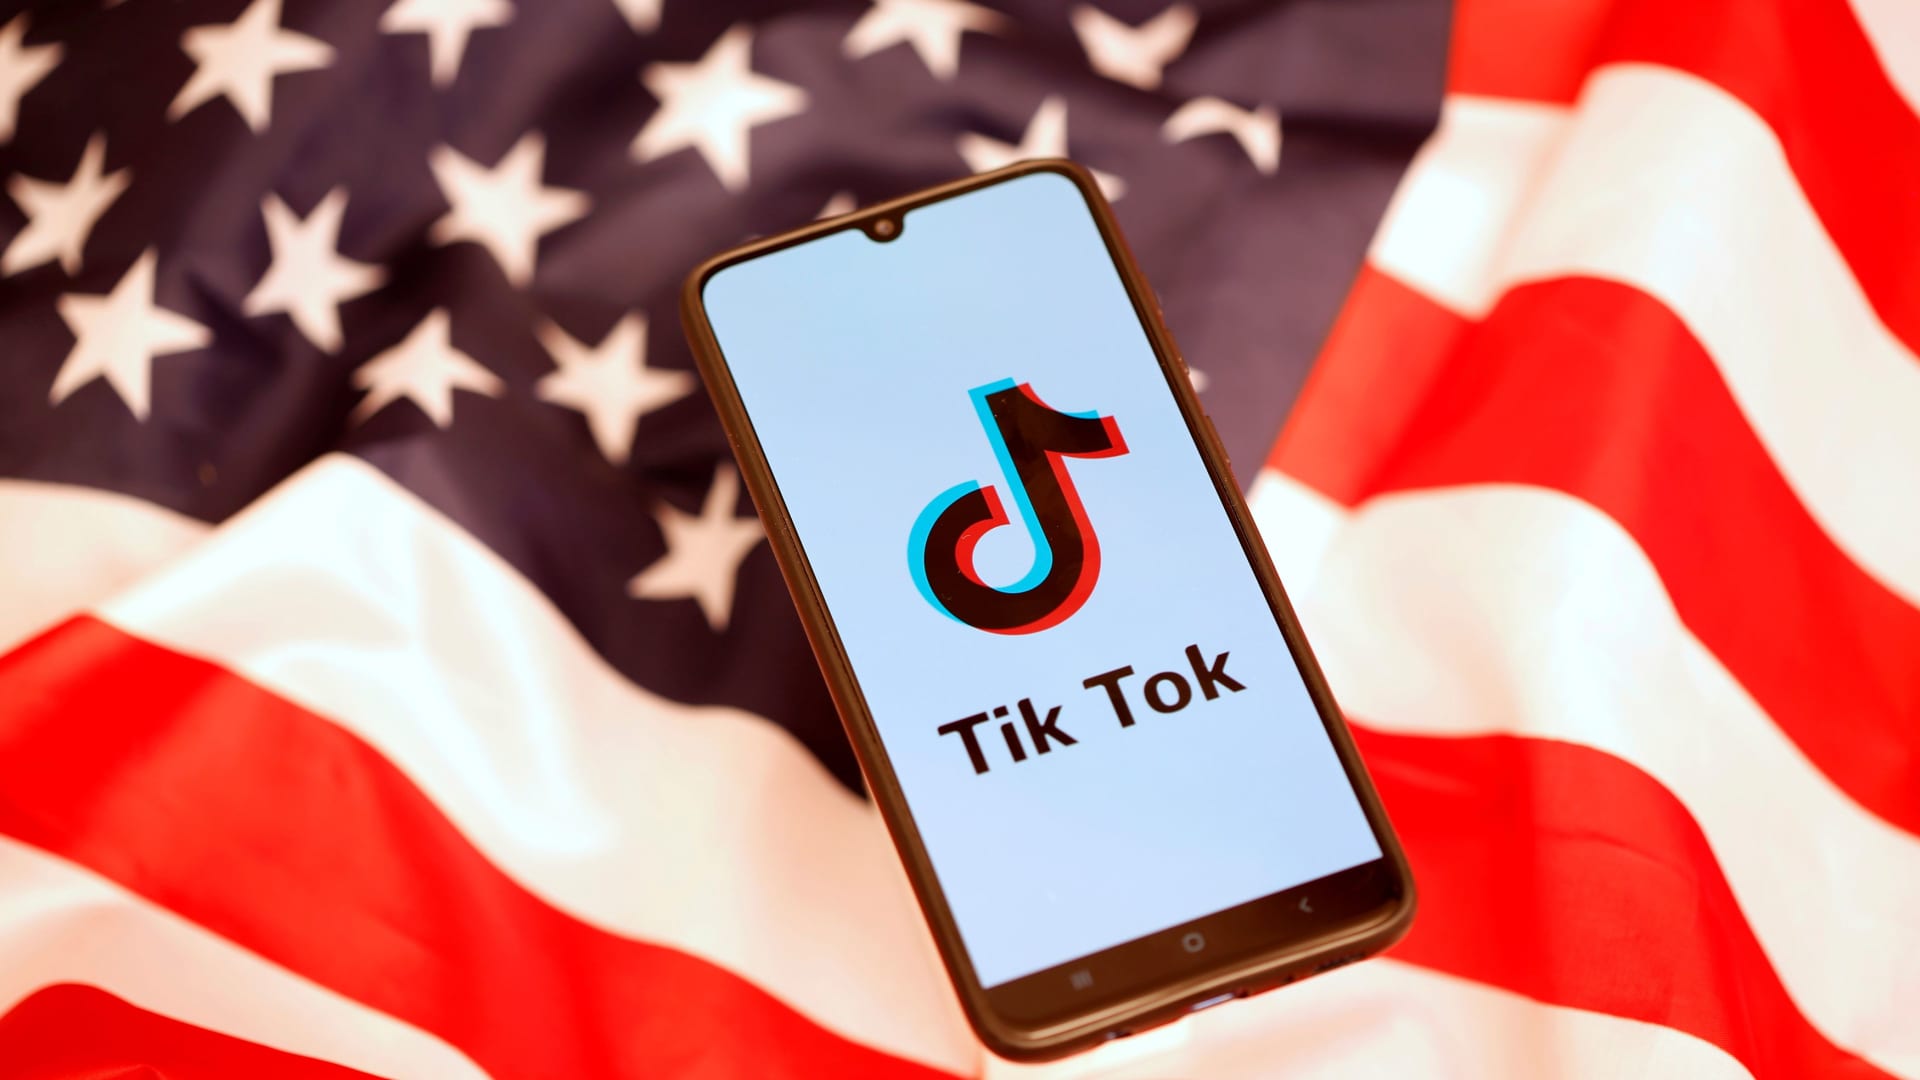 TikTok's potential ban in U.S. could be boon for Meta and Snap